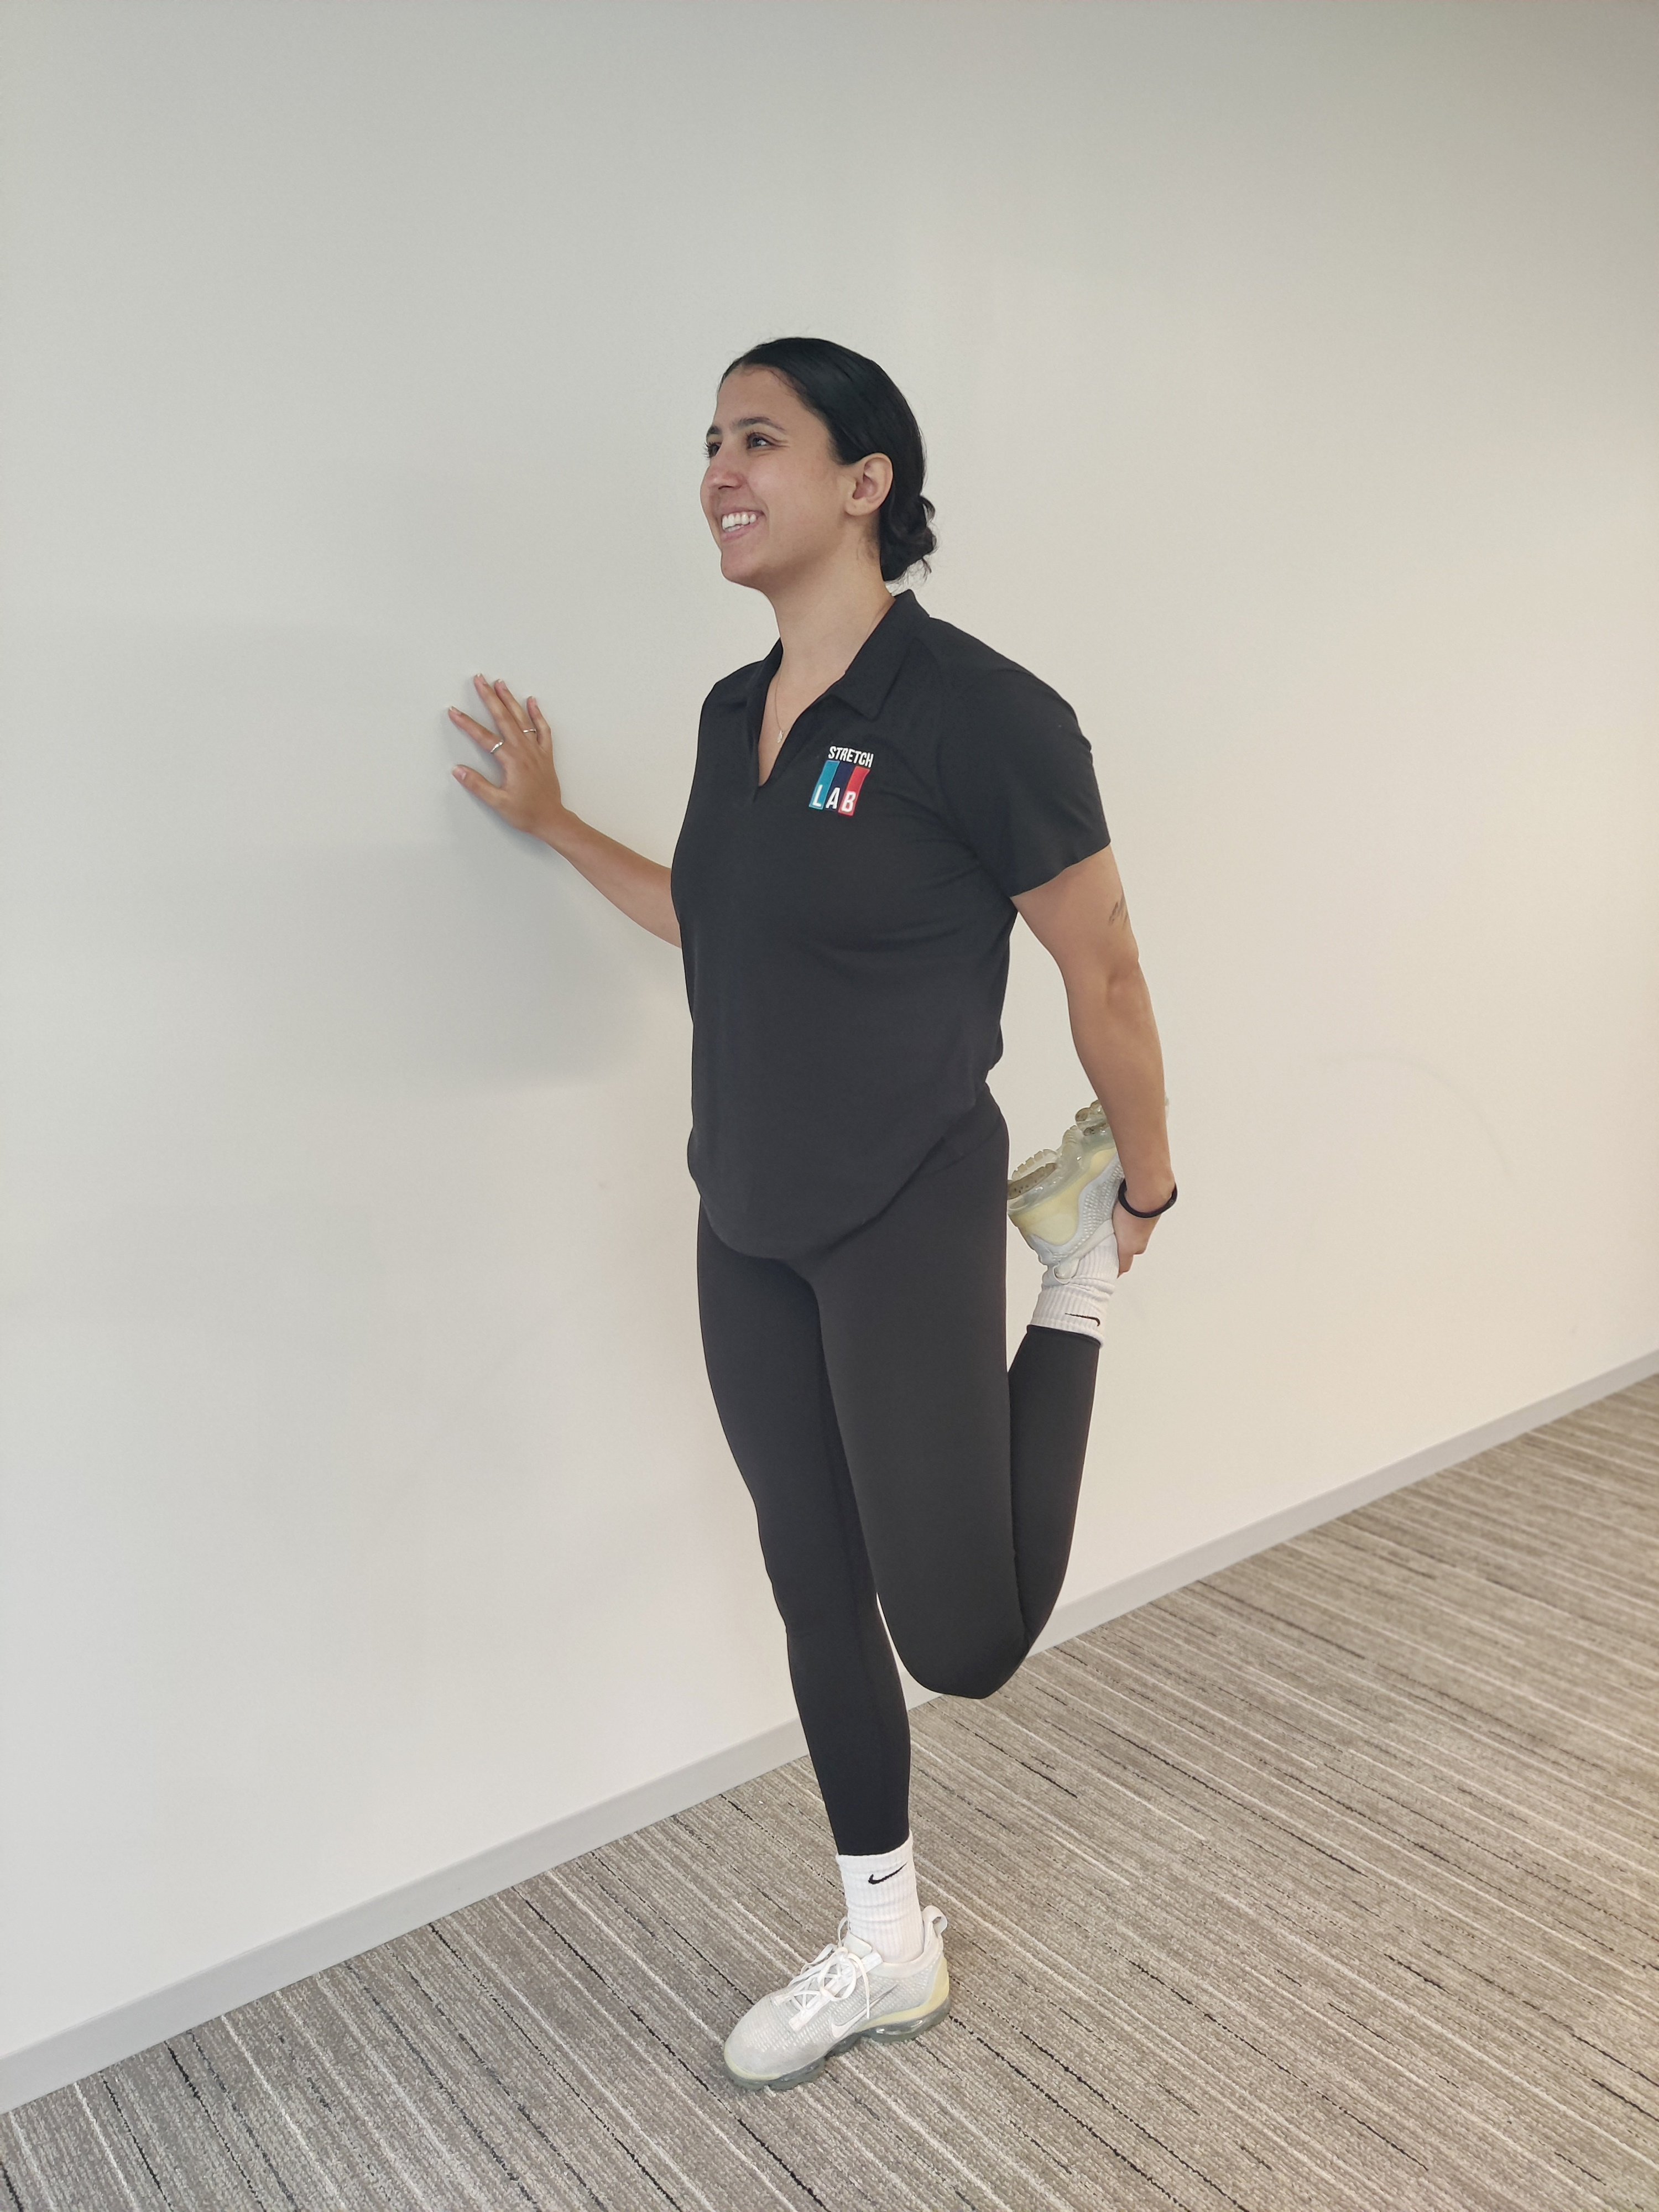 standing quad stretch mobility exercise